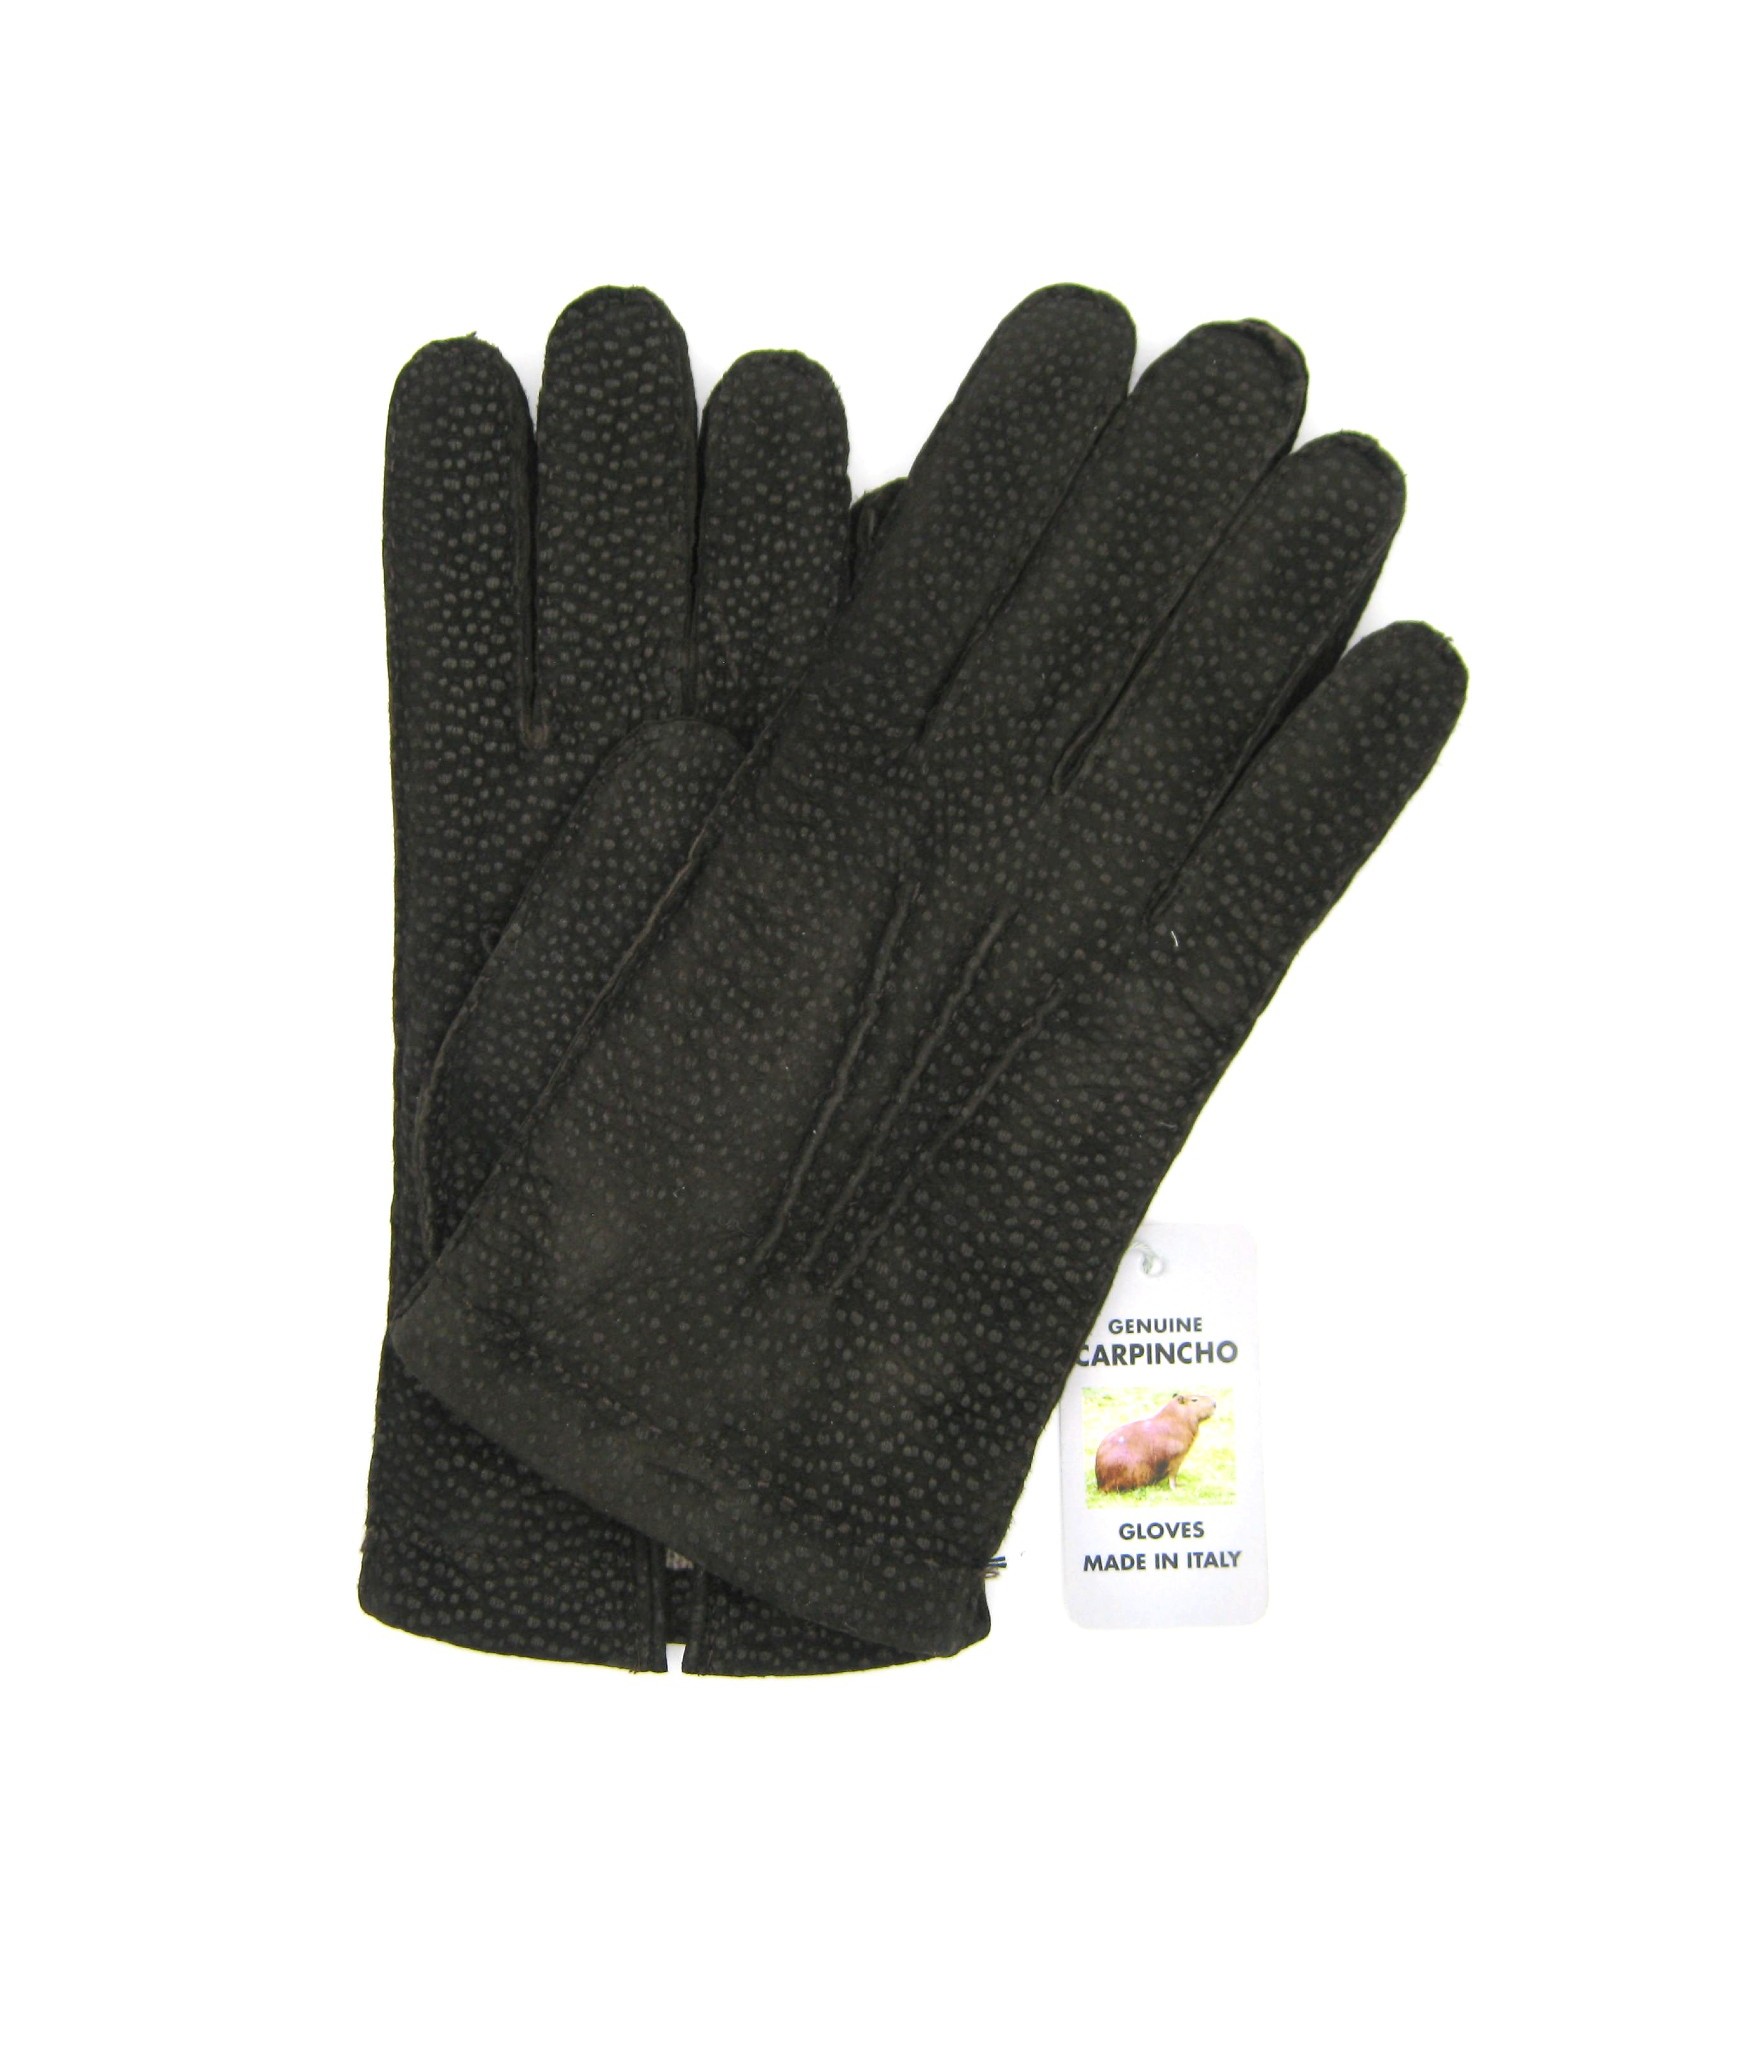 Uomo Classic Carpincho leather gloves cashmere lined, hand